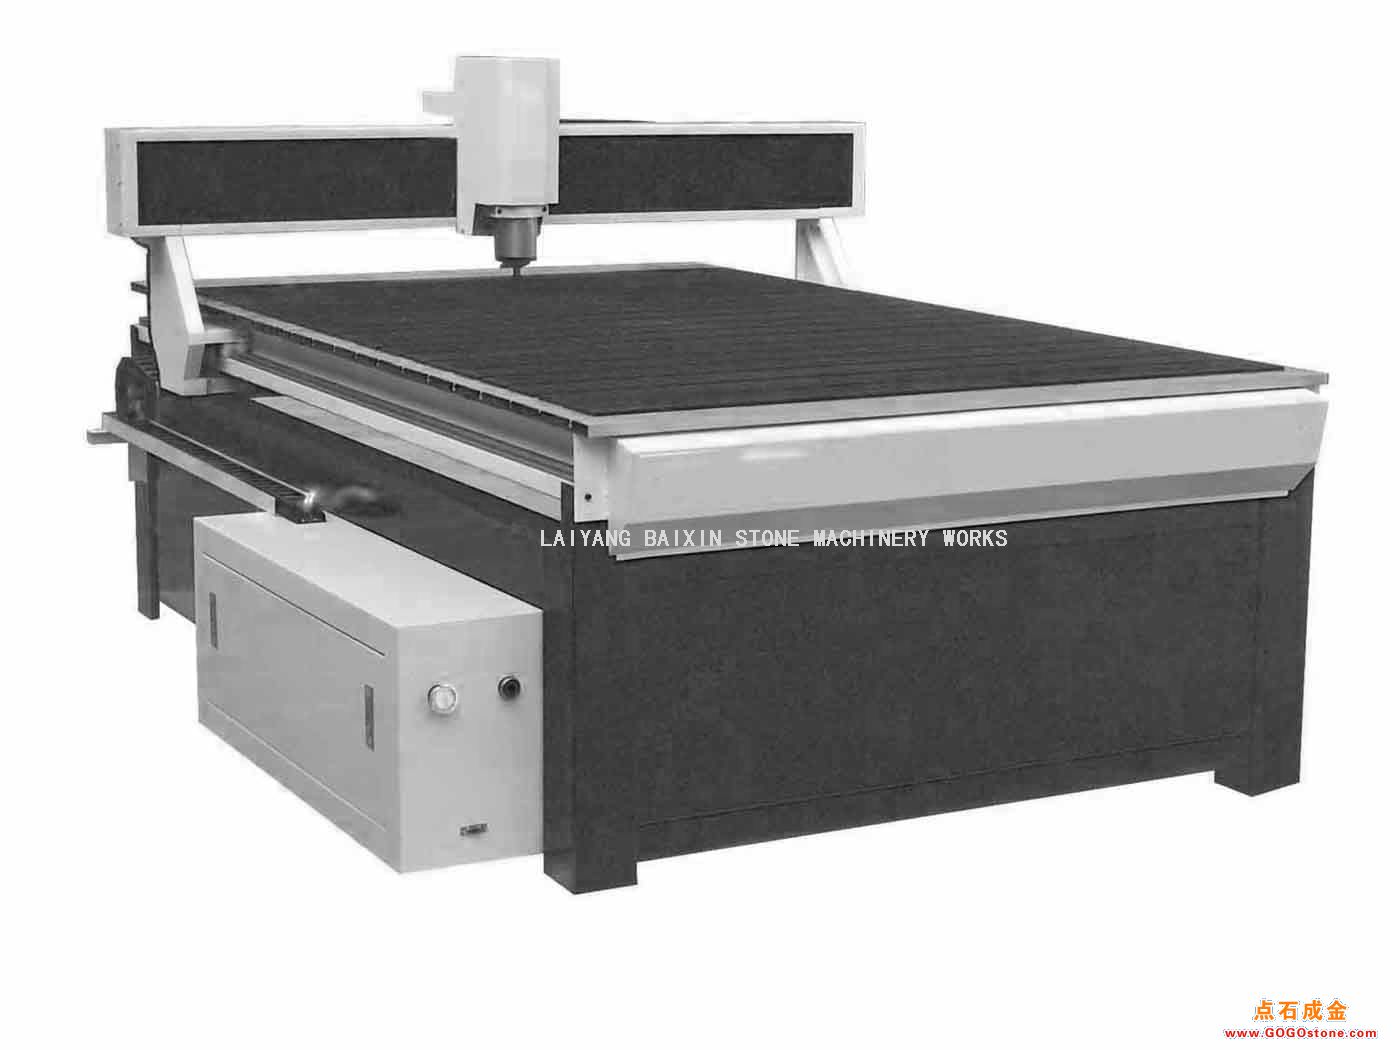 To Sell machinerial engraving machine(picture)